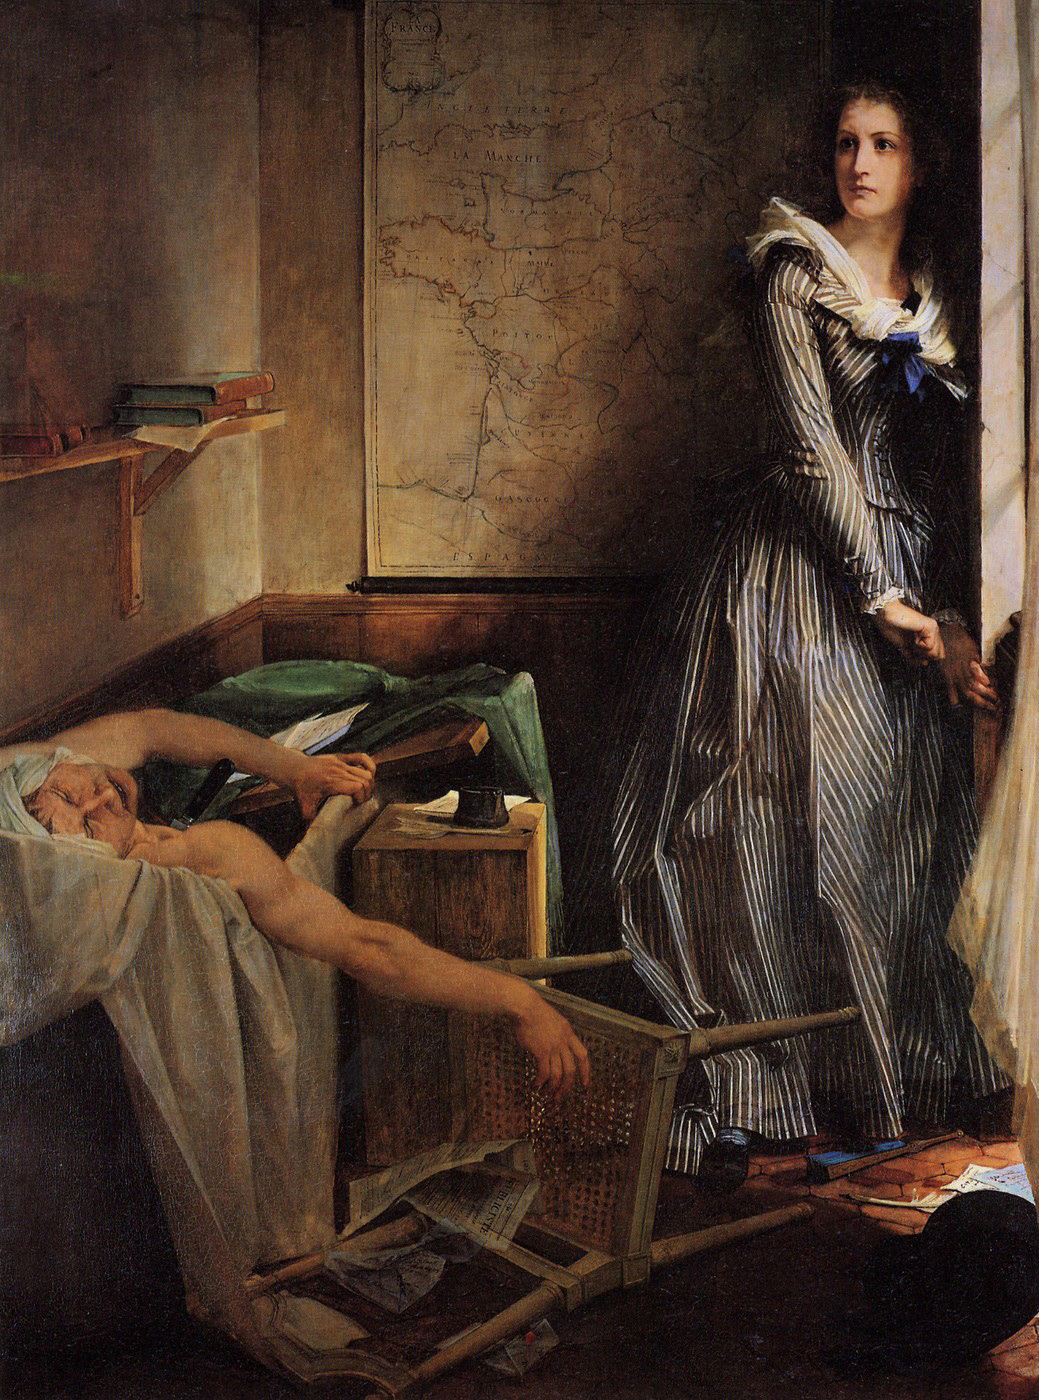 Charlotte Corday by Paul Baudry - 1860 - 203 x 154 cm 